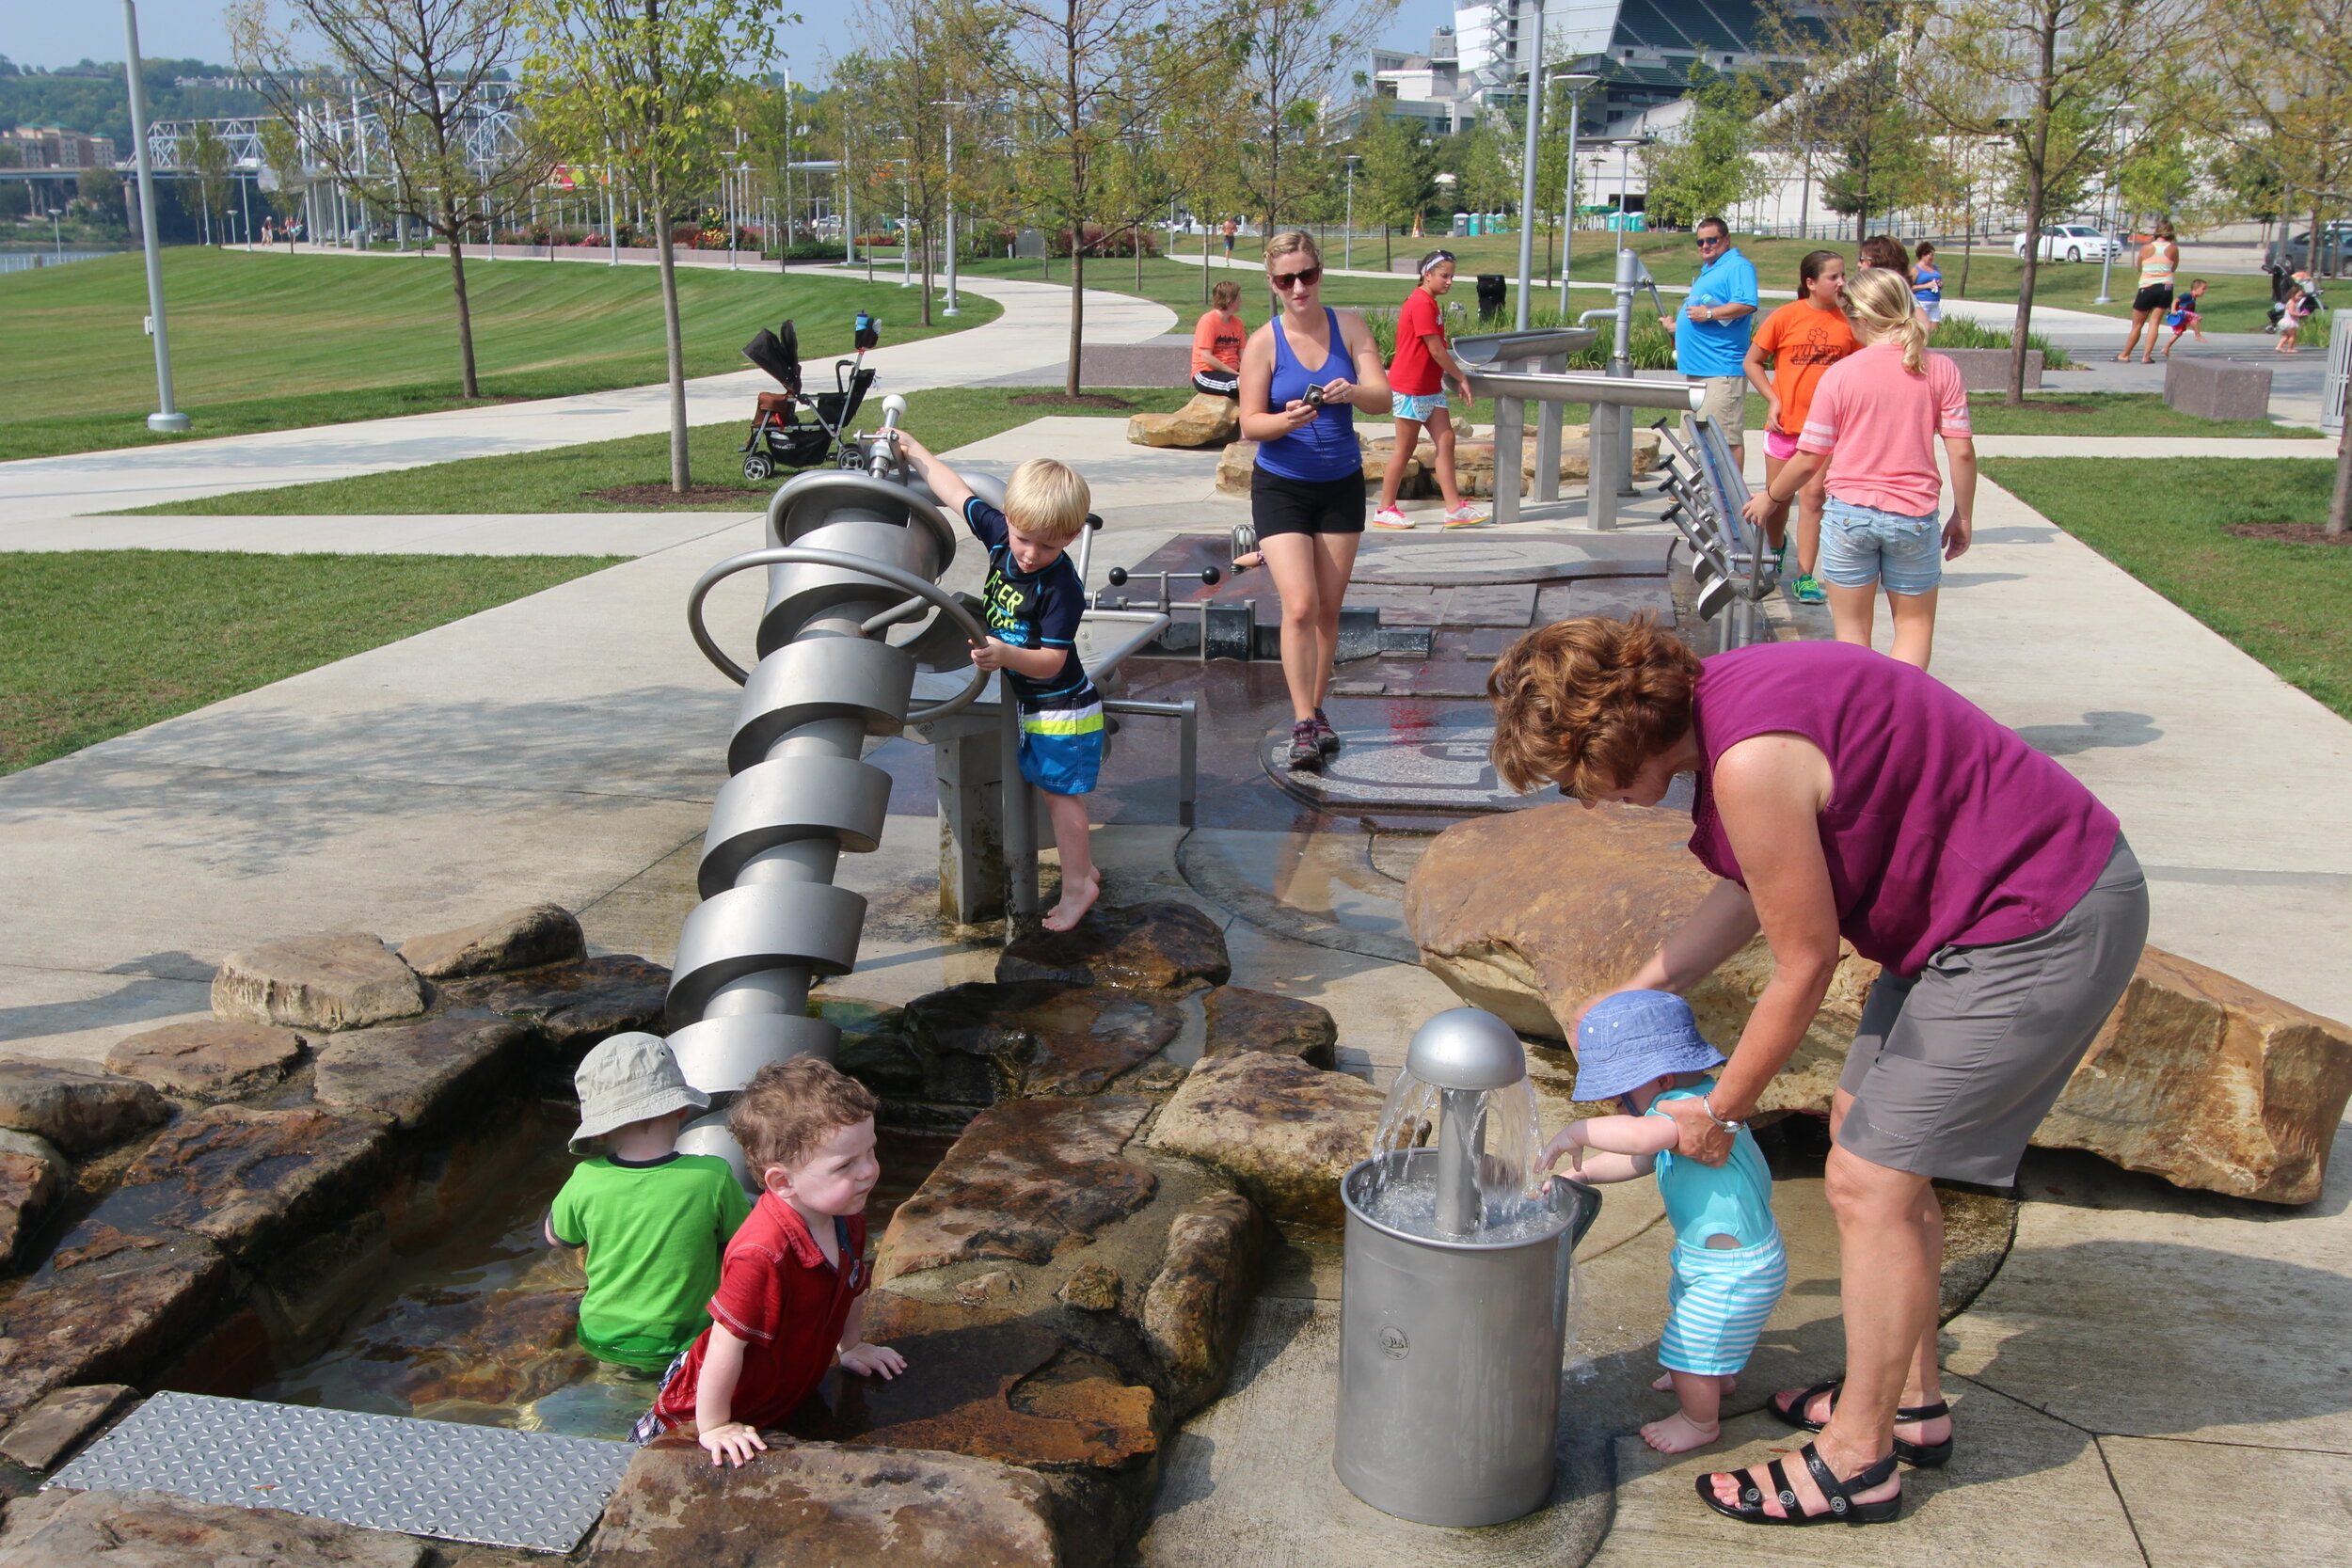  In Cincinnati’s Smale Riverfront Park, Sasaki integrated multiple opportunities for children to interact with water within the Adventure Playground. The playground features a variety of opportunities for kids to grow their social, imaginative, and p